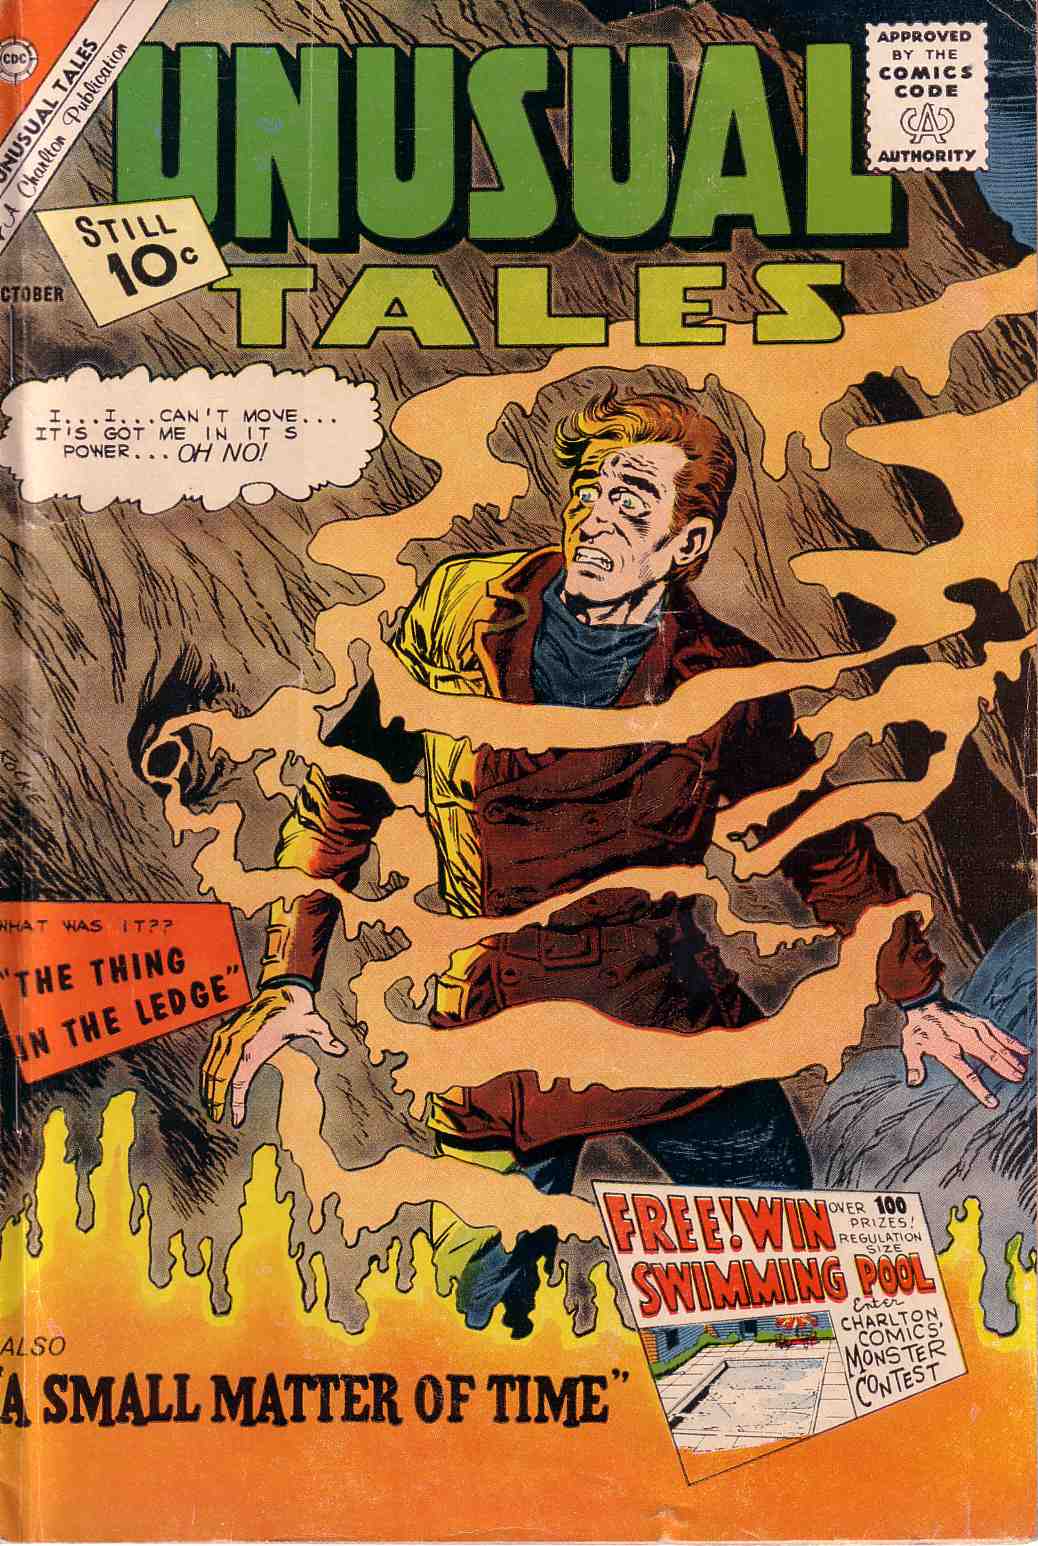 Comic Book Cover For Unusual Tales 30